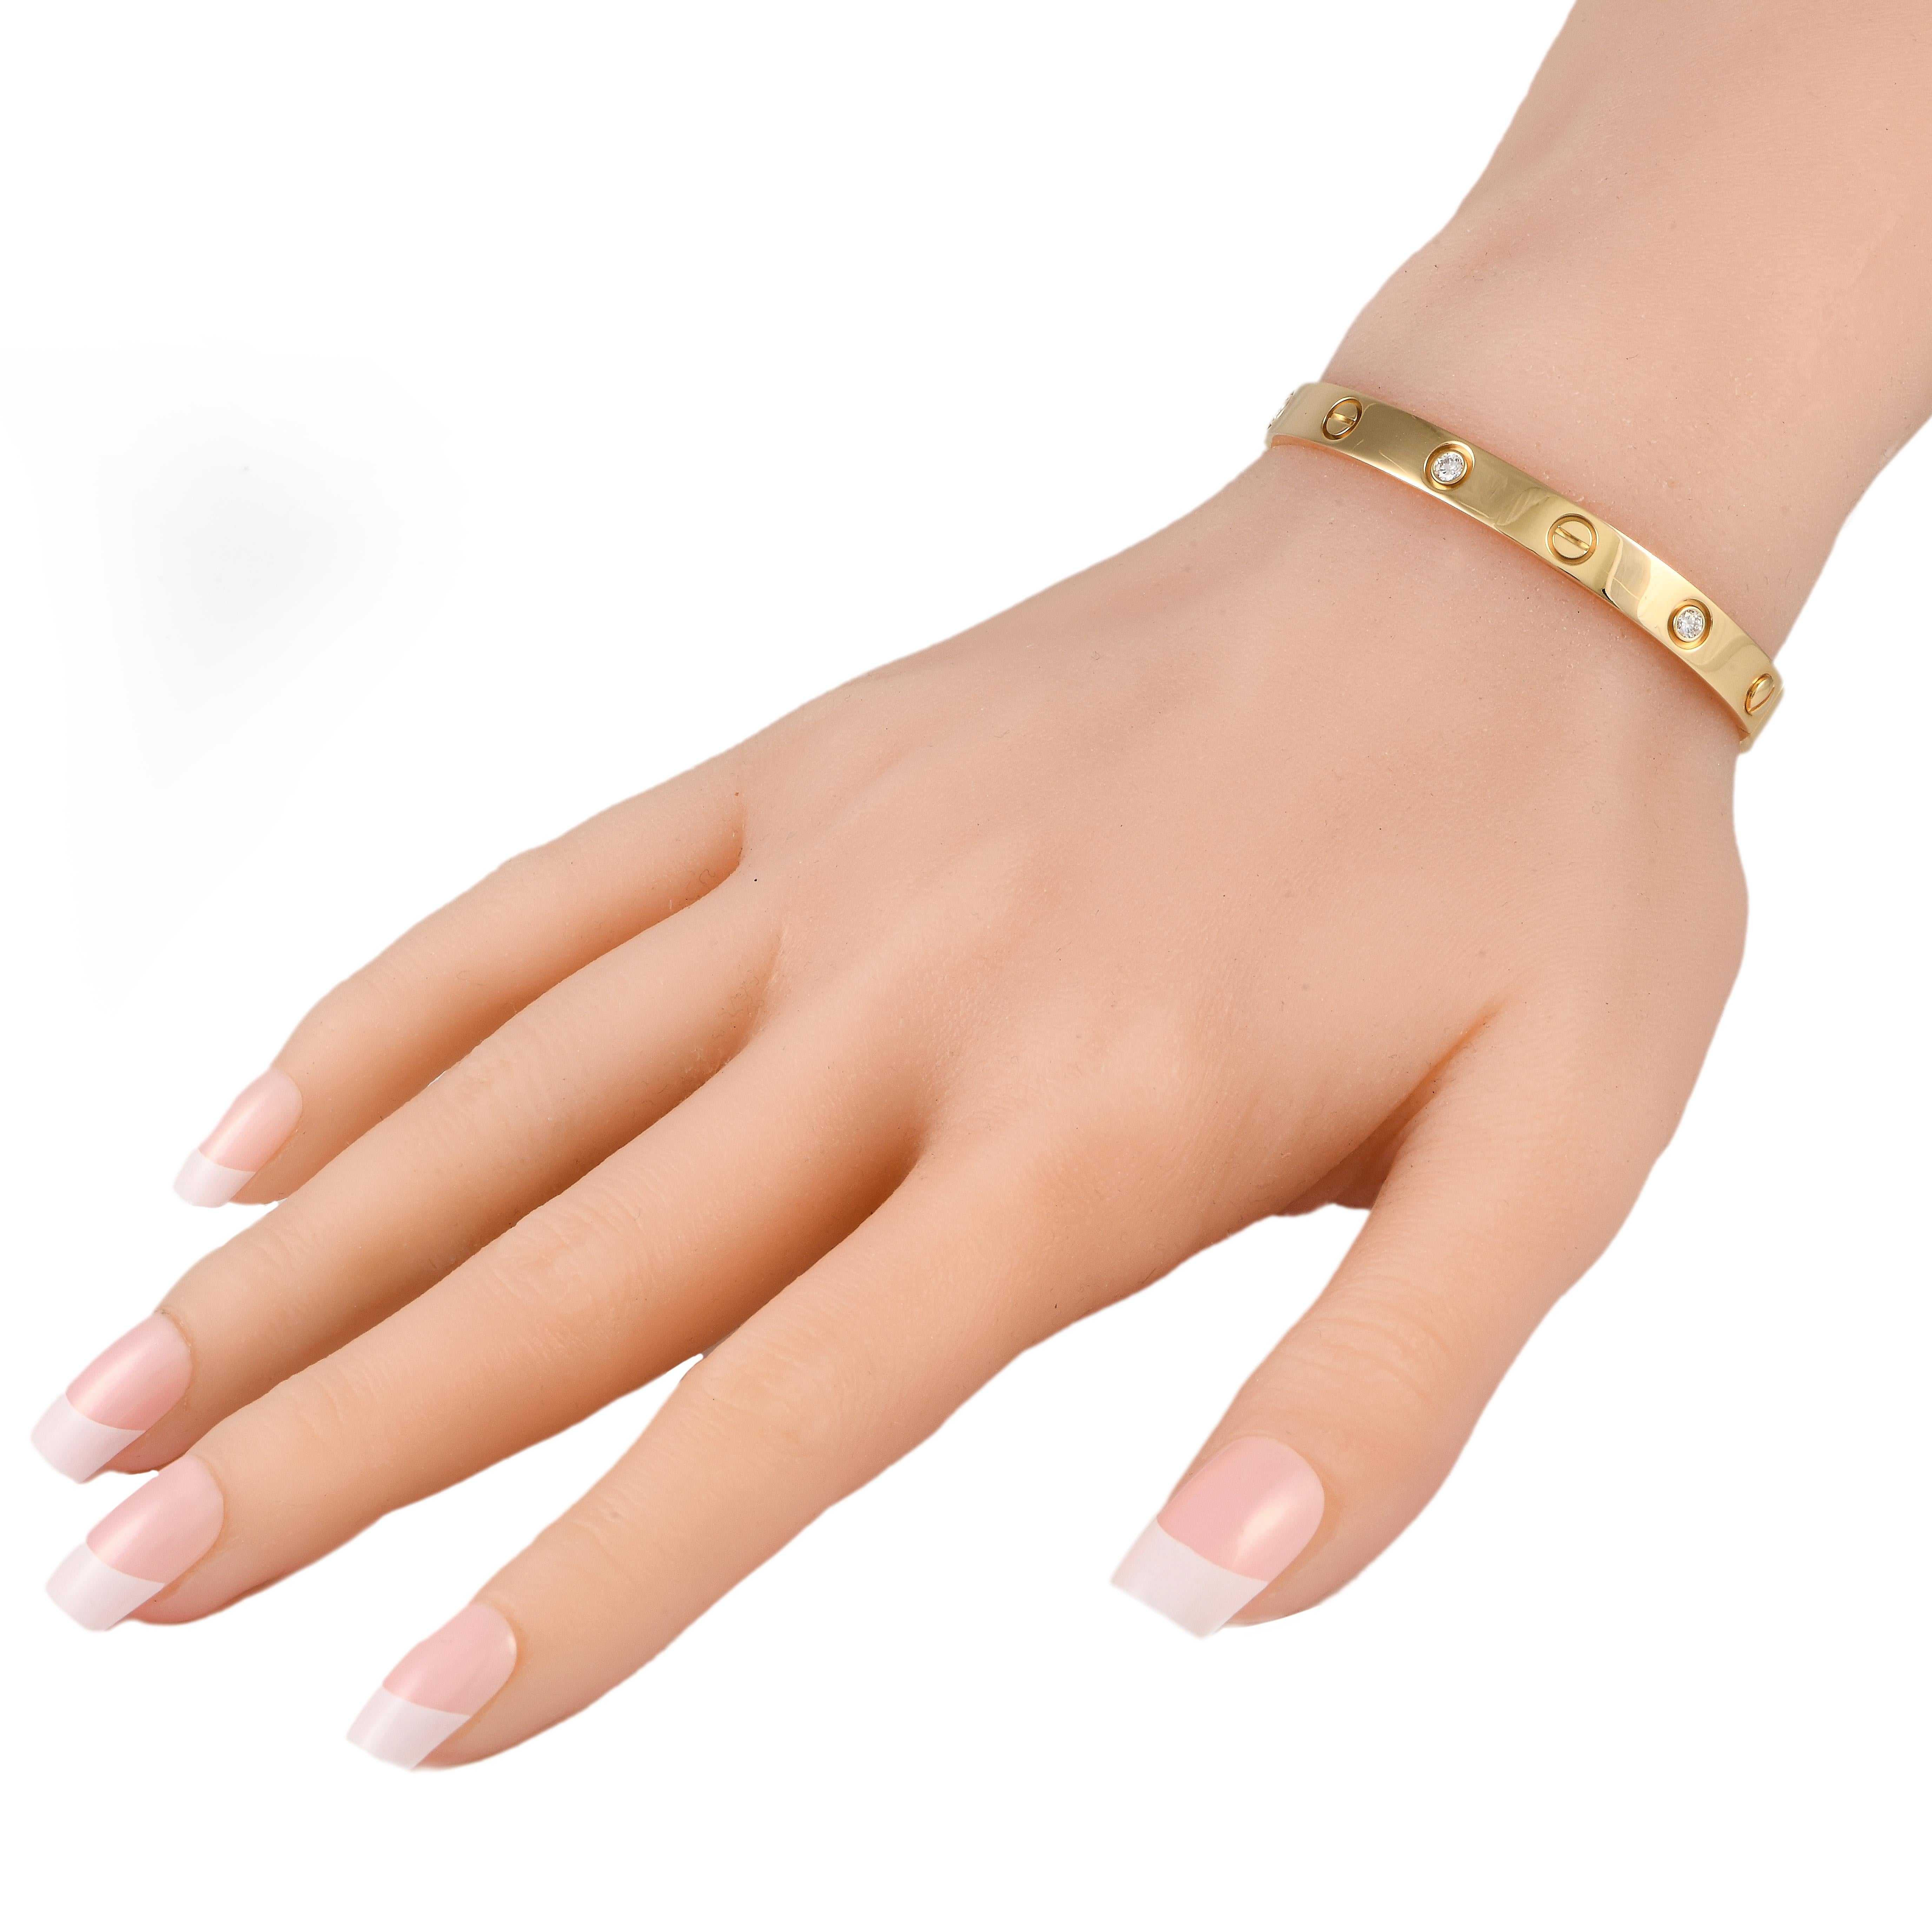 The Cartier Love Bracelet is an iconic piece that will never go out of style. Crafted from 18K Rose Gold, this simple, elegant design measures 6.7\u201d long and comes to life thanks to 4 sparkling inset diamonds.\r\nThis jewelry piece is offered in